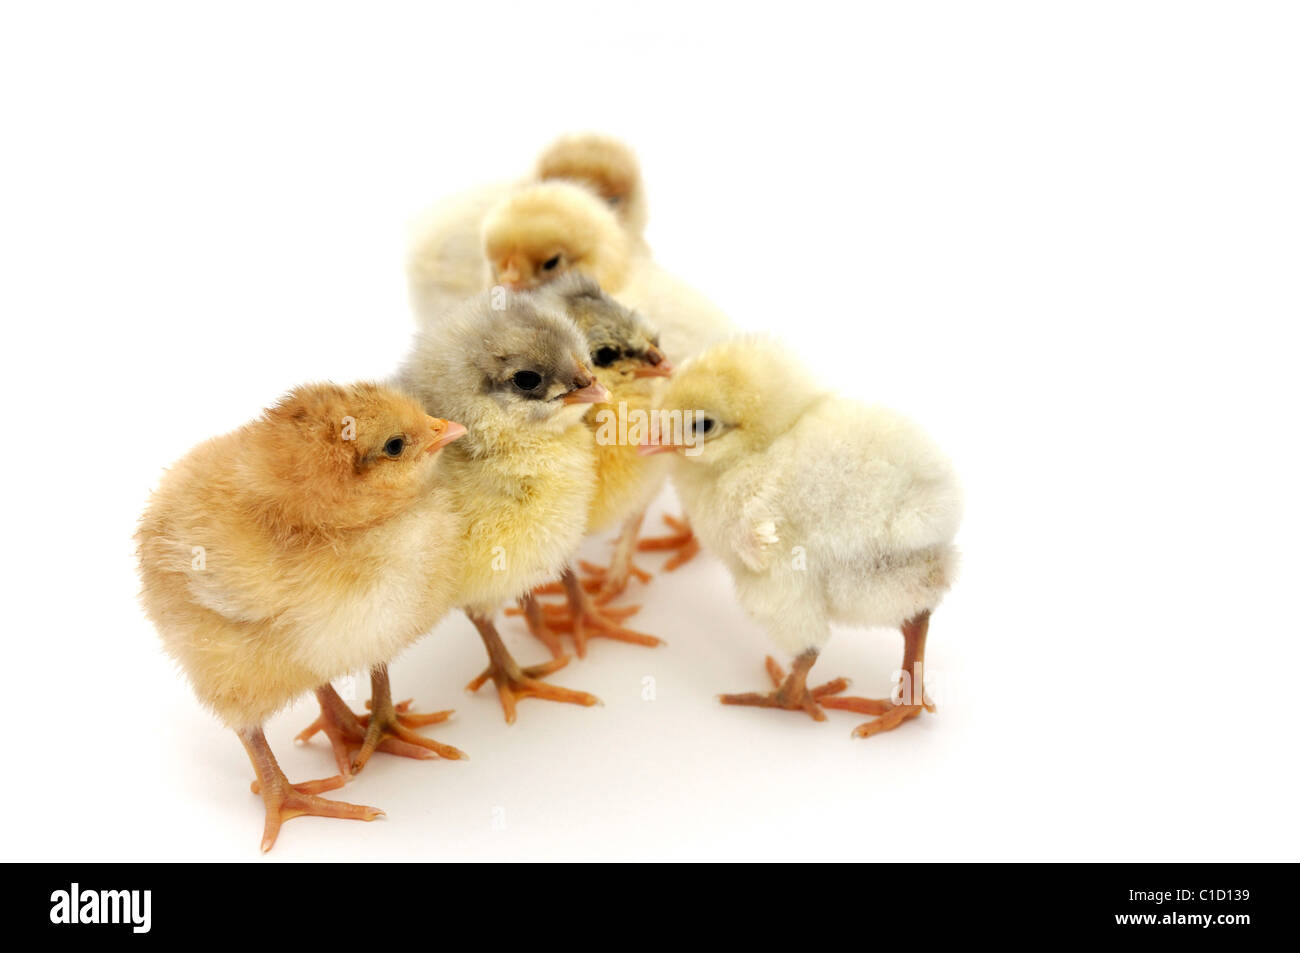 Chicks on white background Banque D'Images